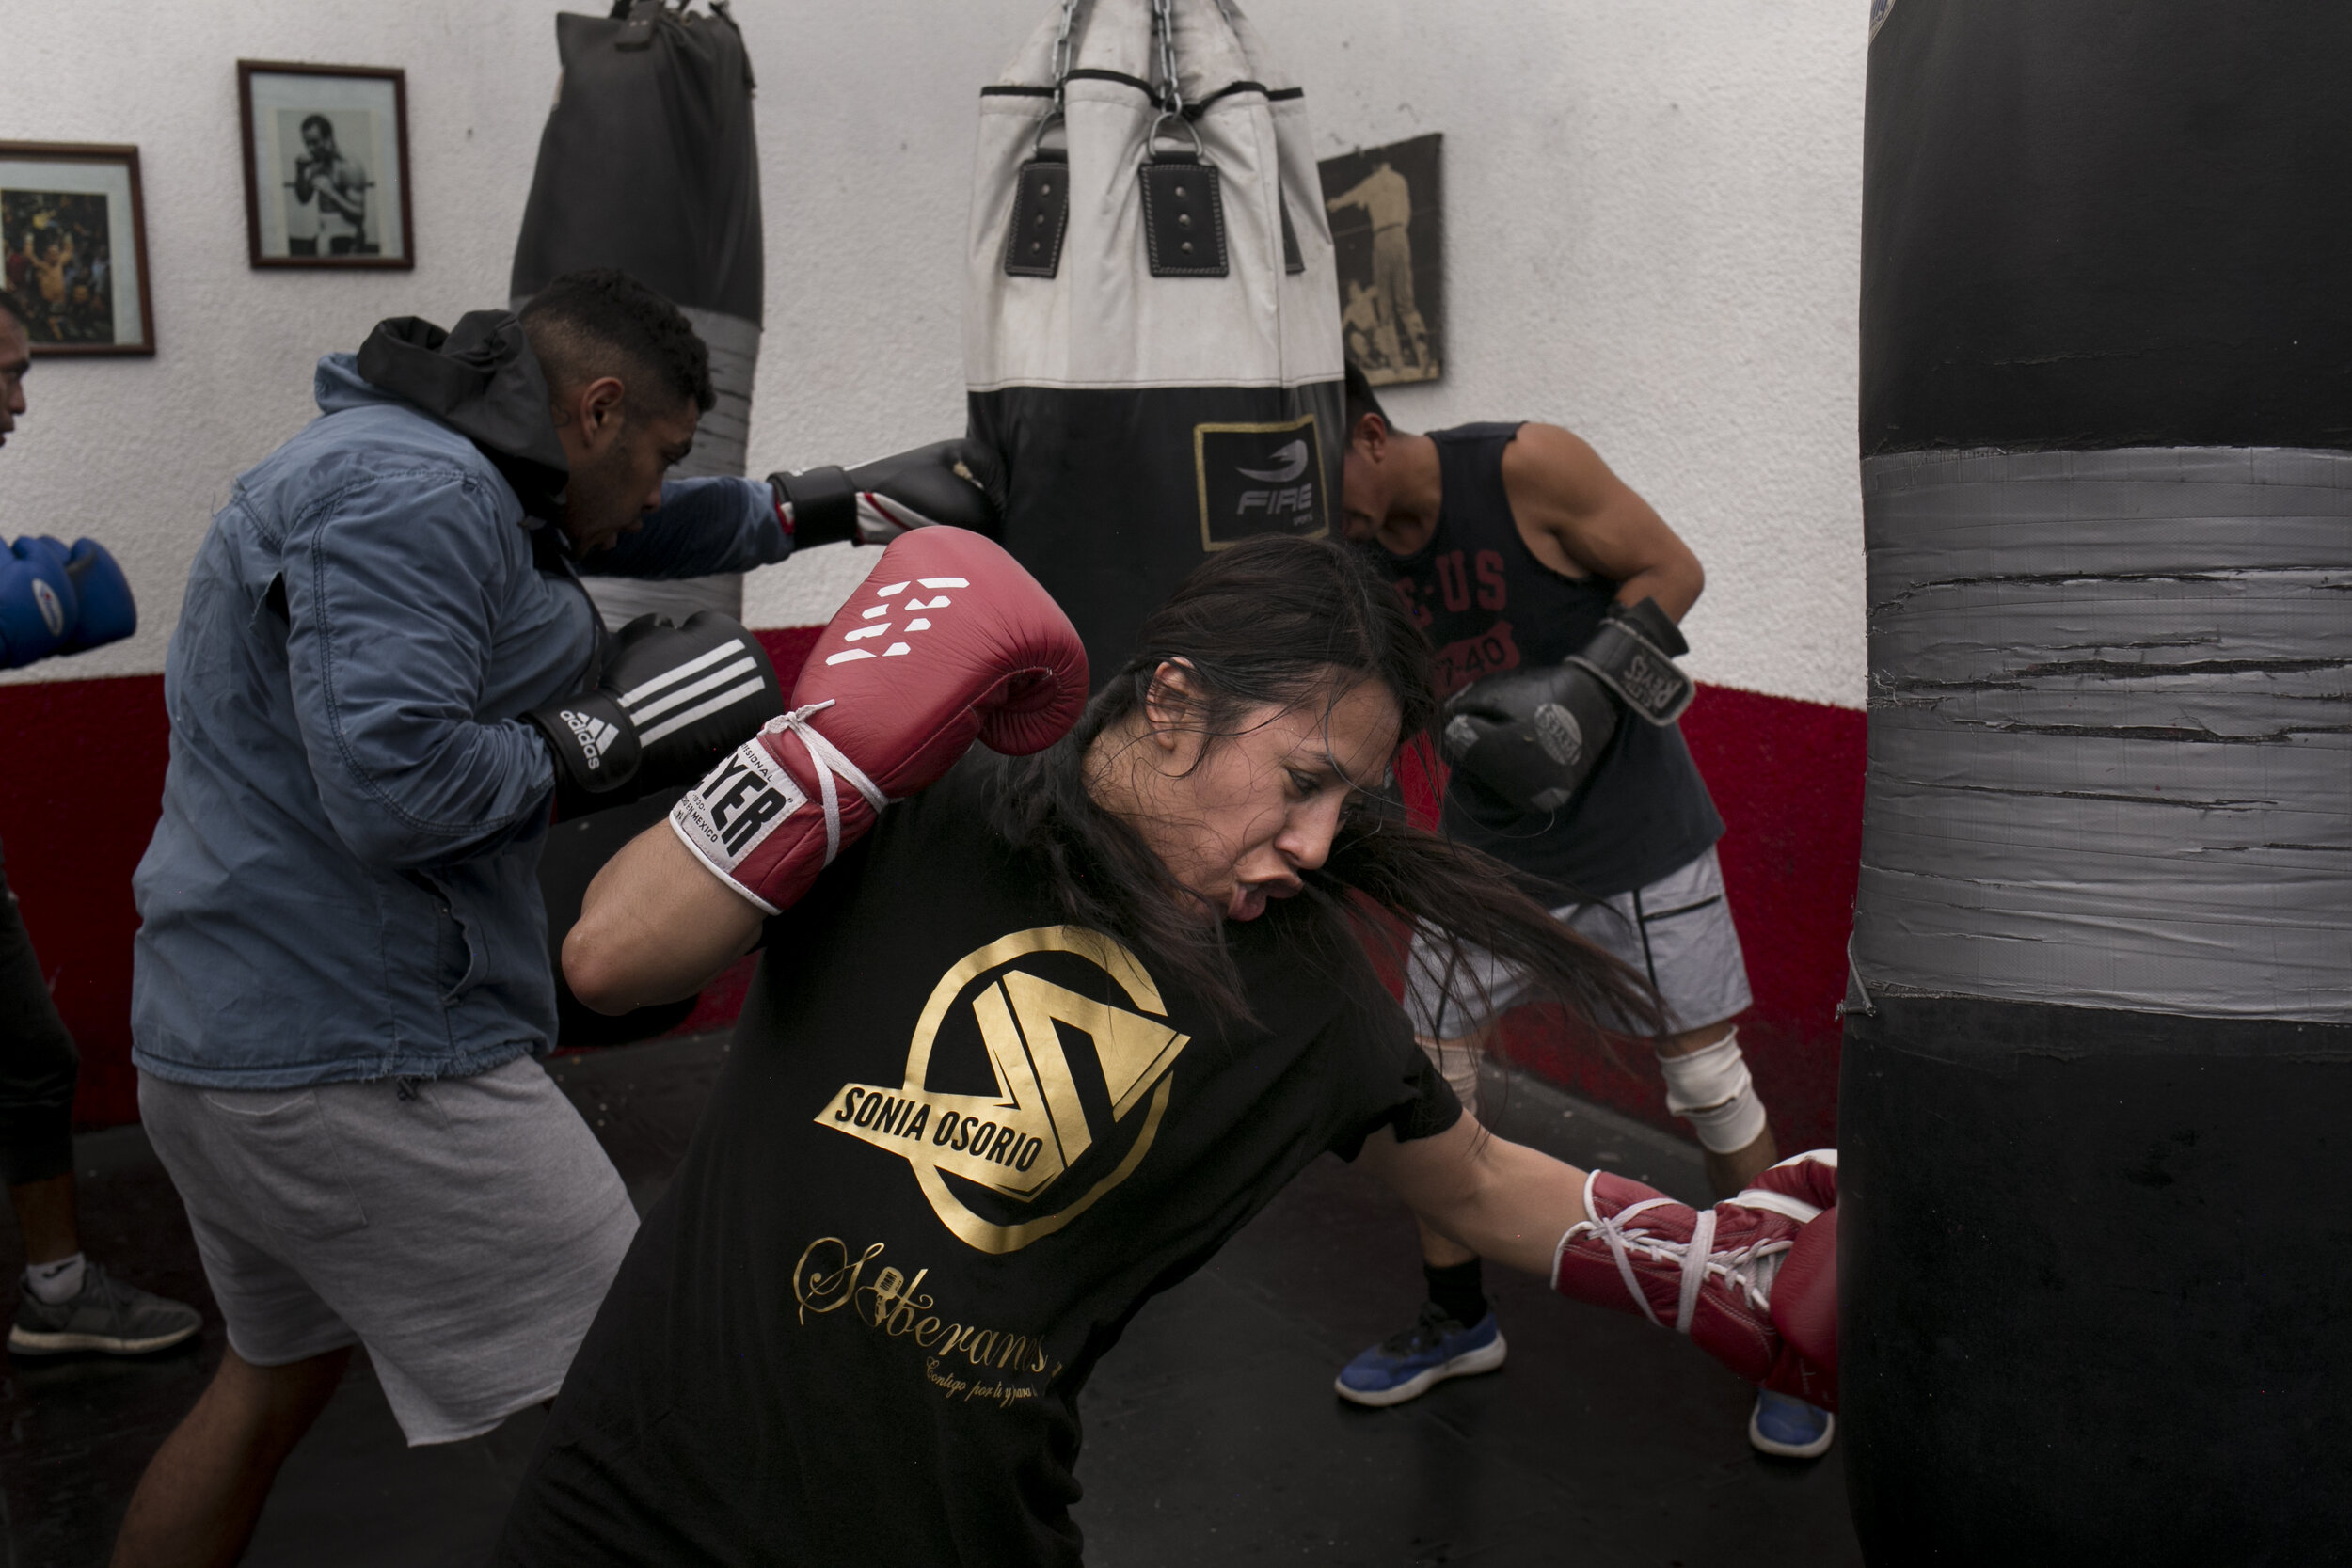  Sonia Osorio became the Super Flyweight World Champion this fall. She’s been training at Romanza for 12 years and, on Tin Tan’s advice, stayed in school the whole time became a lawyer. Professional boxers in Mexico typically make only 1000 pesos ($5